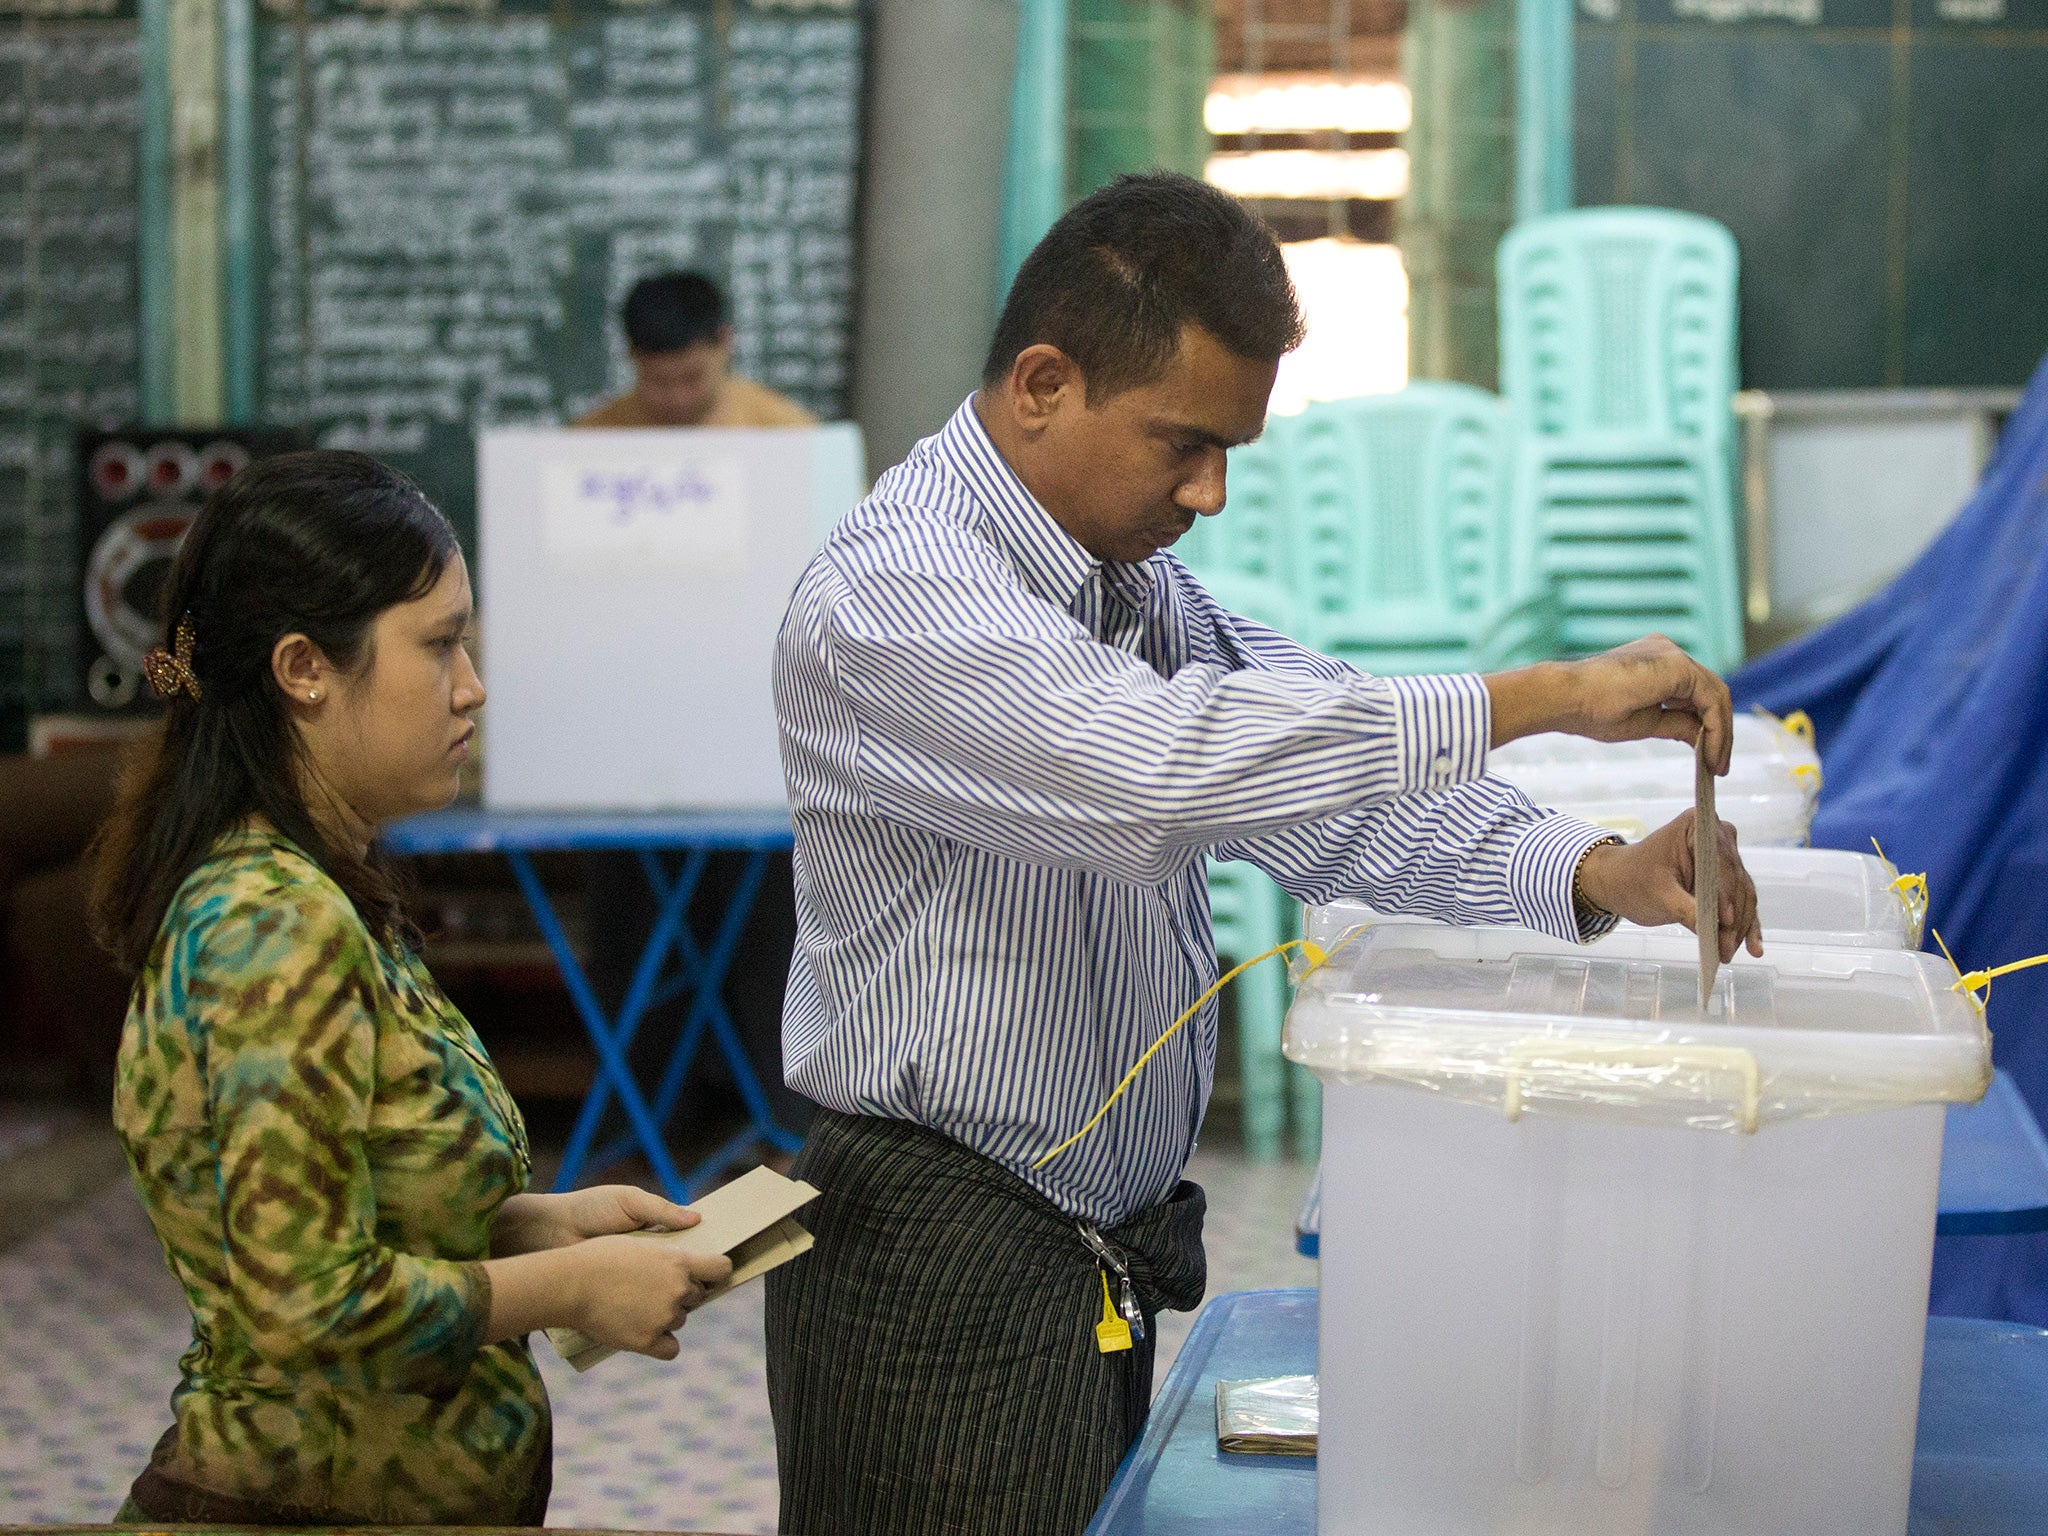 A couple cast their vote at a polling booth for advance voting in central in Rangoon